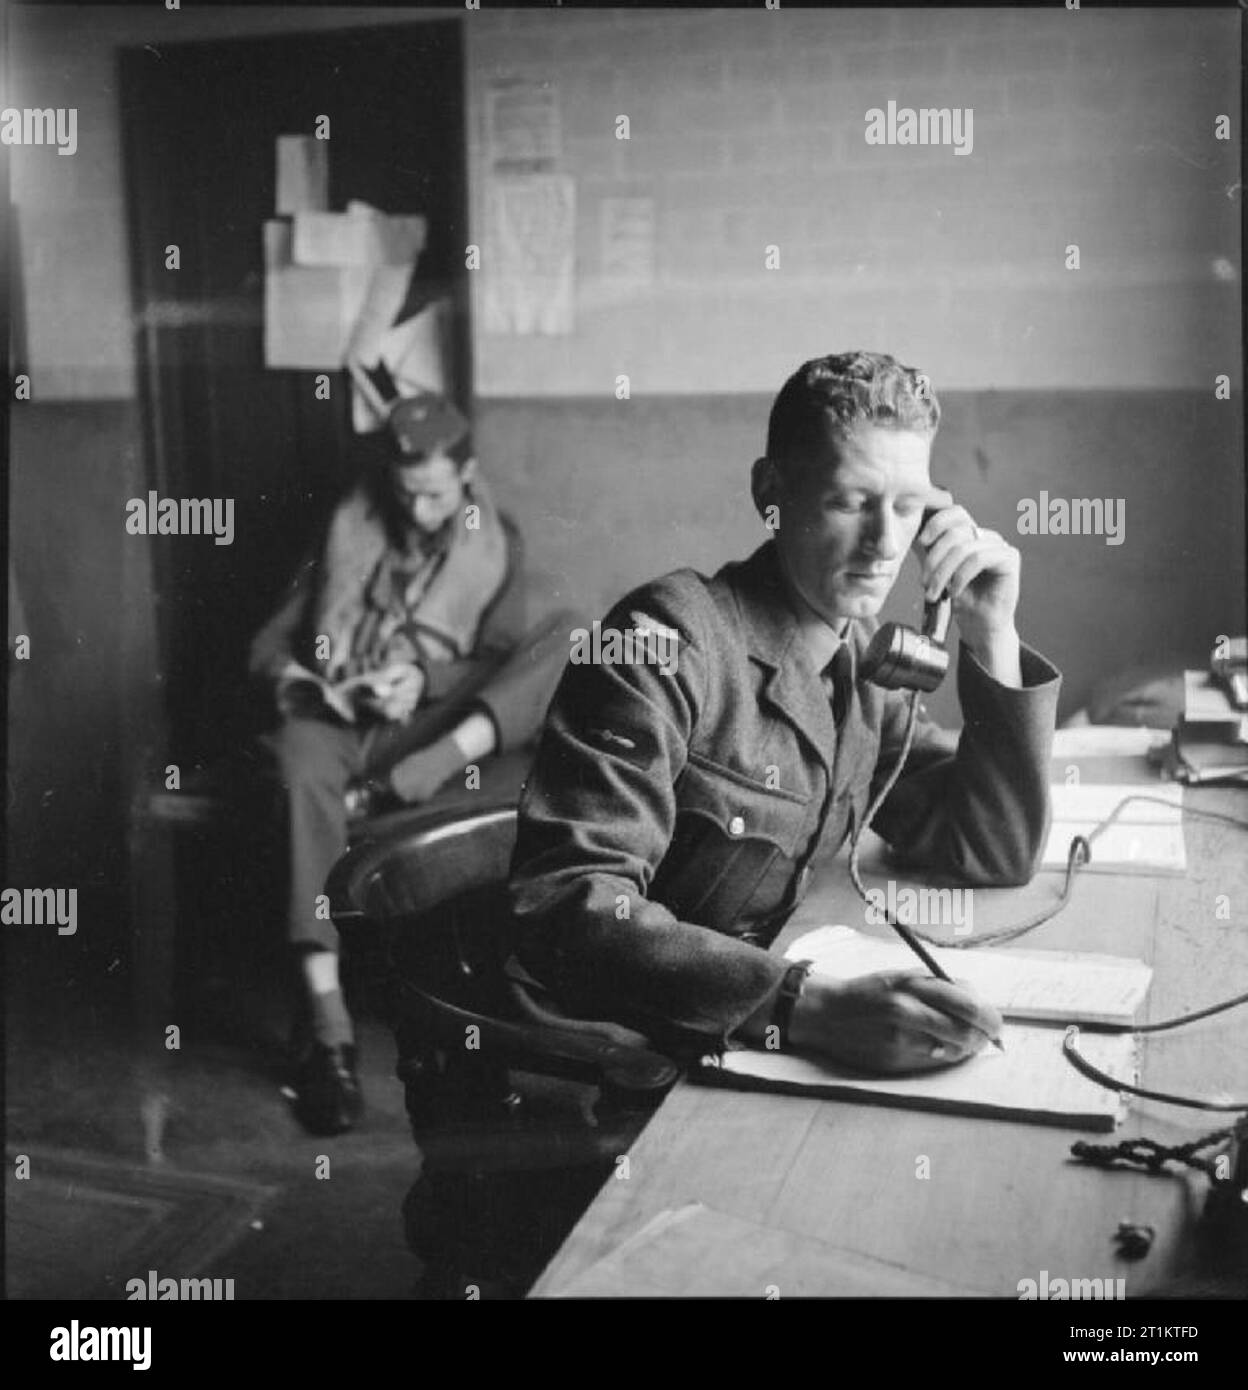 Americans in Britain- the work of No 121 (eagle) Squadron RAF, Rochford, Essex, August 1942 In the Dispersal Hut at Rochford airfield, the telephonist logs a call from the Control Tower, confirming that 12 Spitfires are successfully airborne. In the background, a 'spare' pilot reads a book. Stock Photo